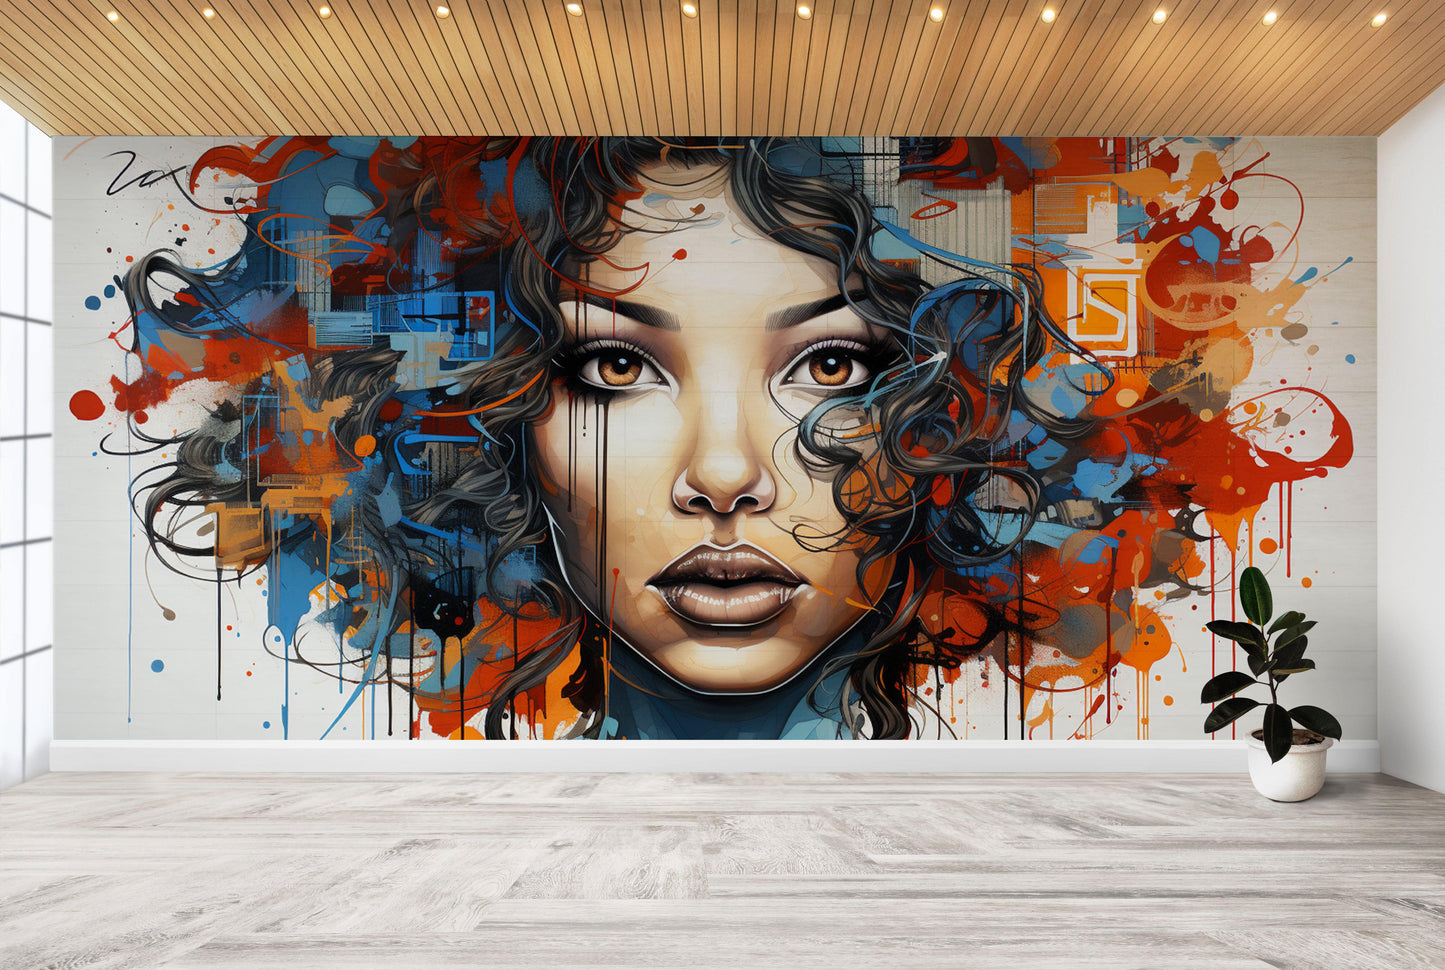 graffiti design that features unity and 100 peop 24